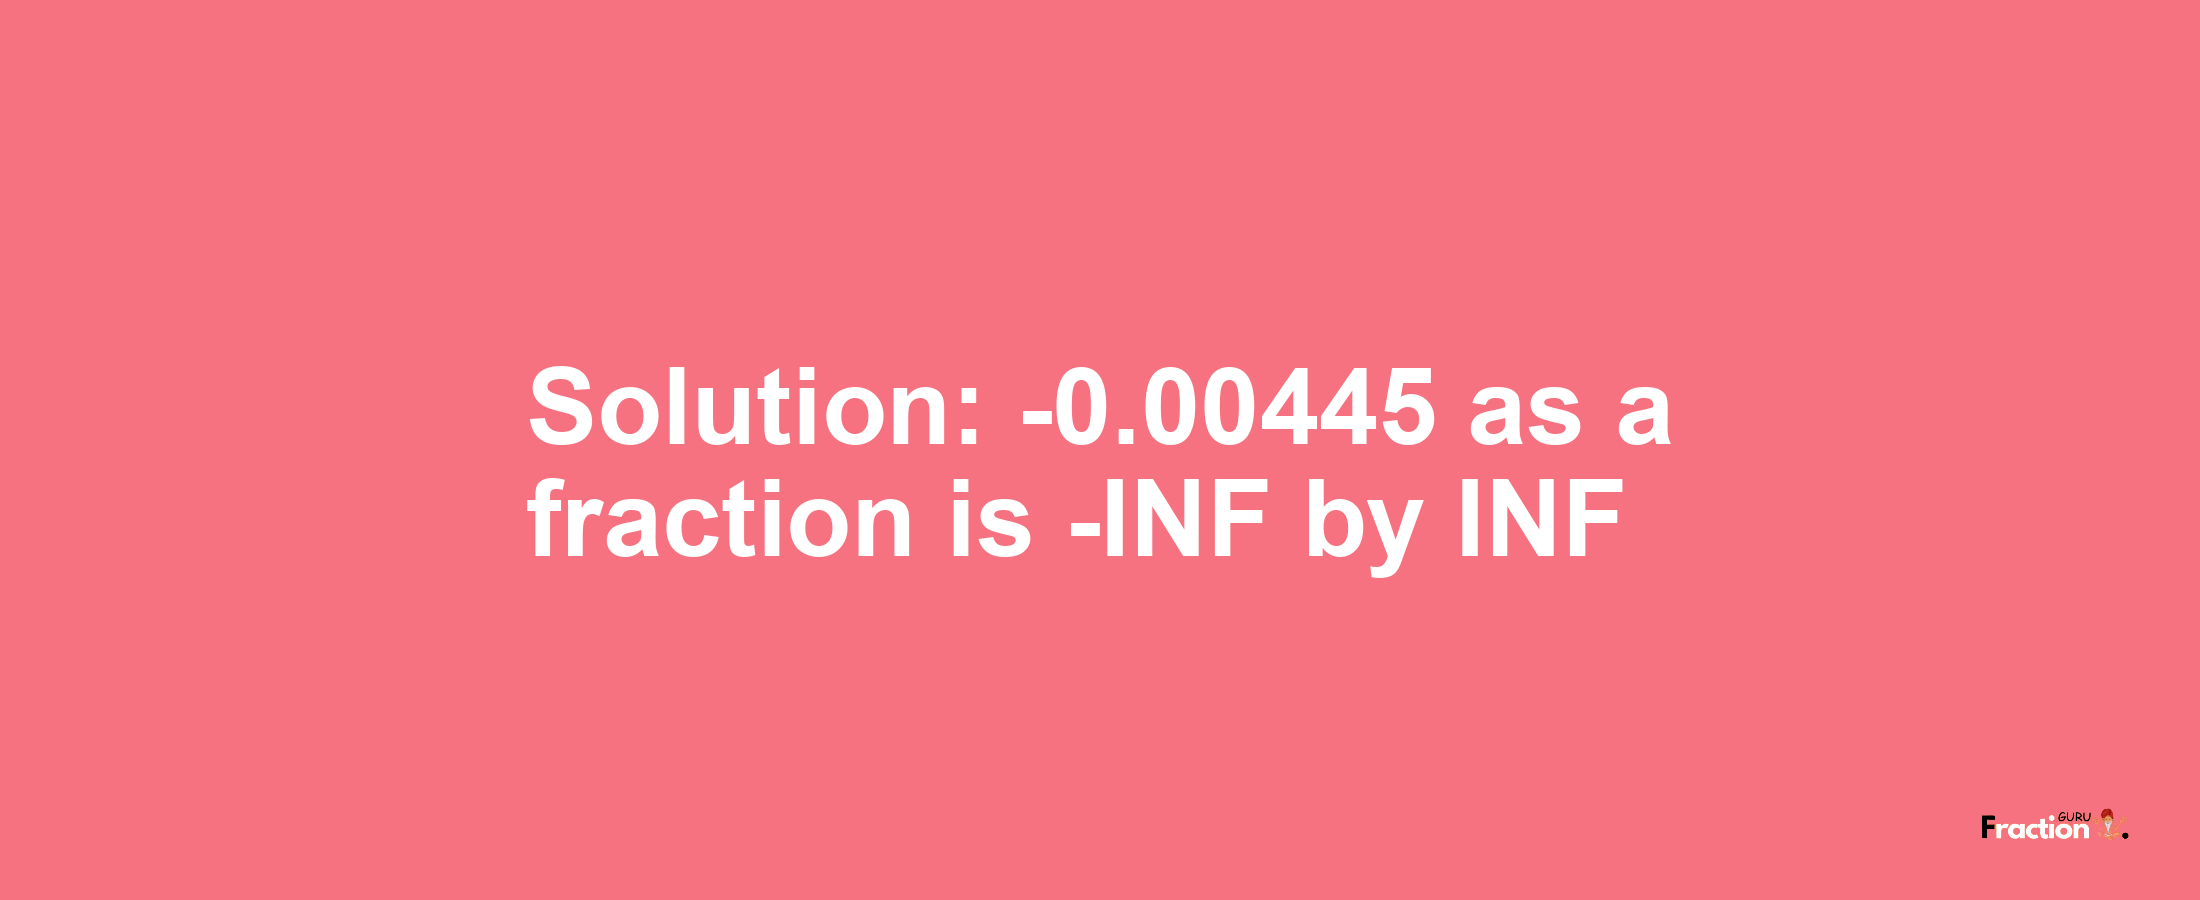 Solution:-0.00445 as a fraction is -INF/INF